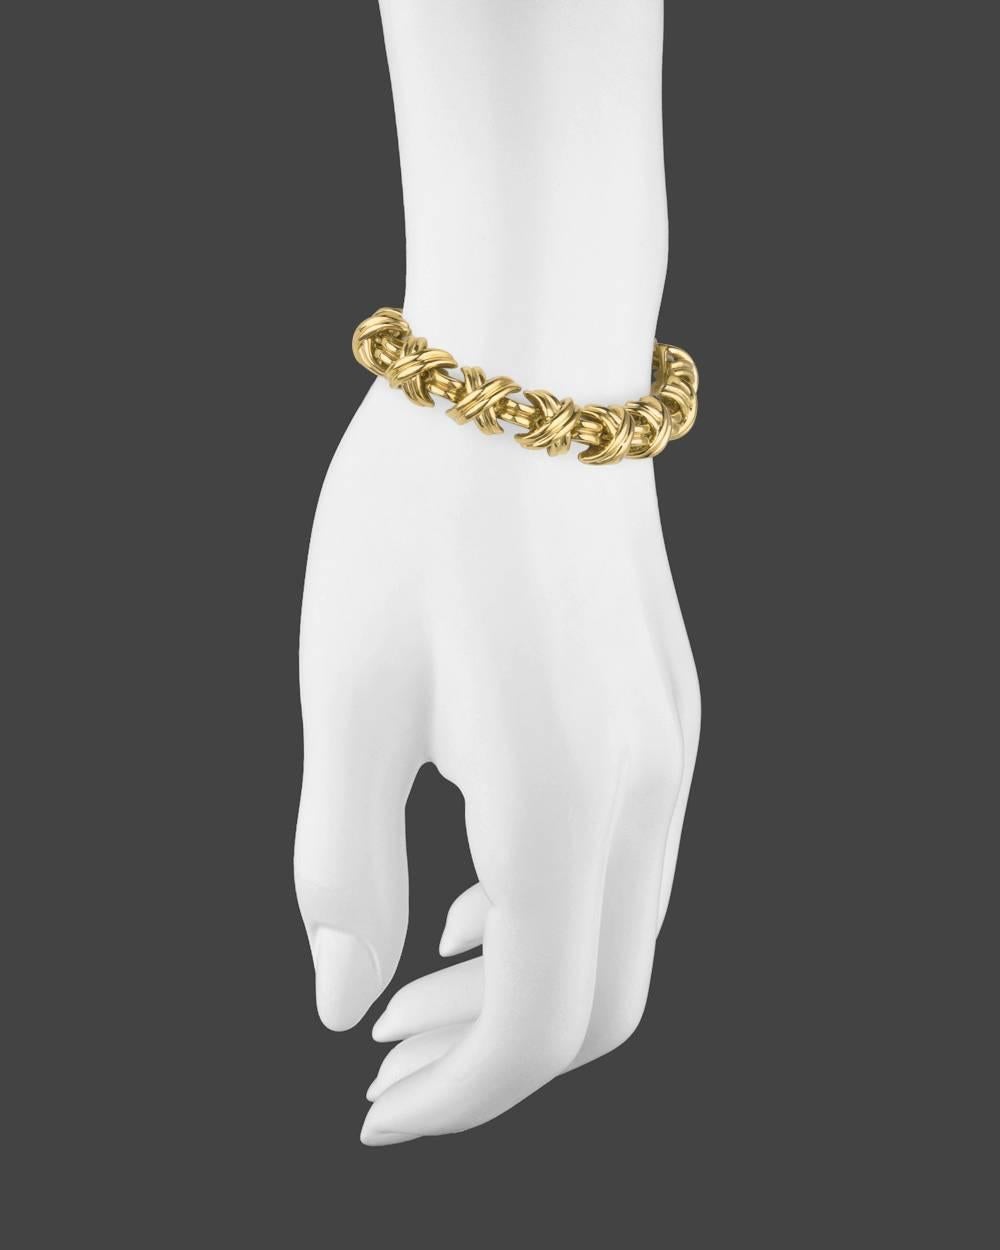 "Signature" link bracelet, composed of 'X'-motif links in polished 18k yellow gold, secured by a box clasp with safety catch, stamped 'T&CO' for Tiffany & Co. 7.25" long and 0.4" width. 47.32 grams.
